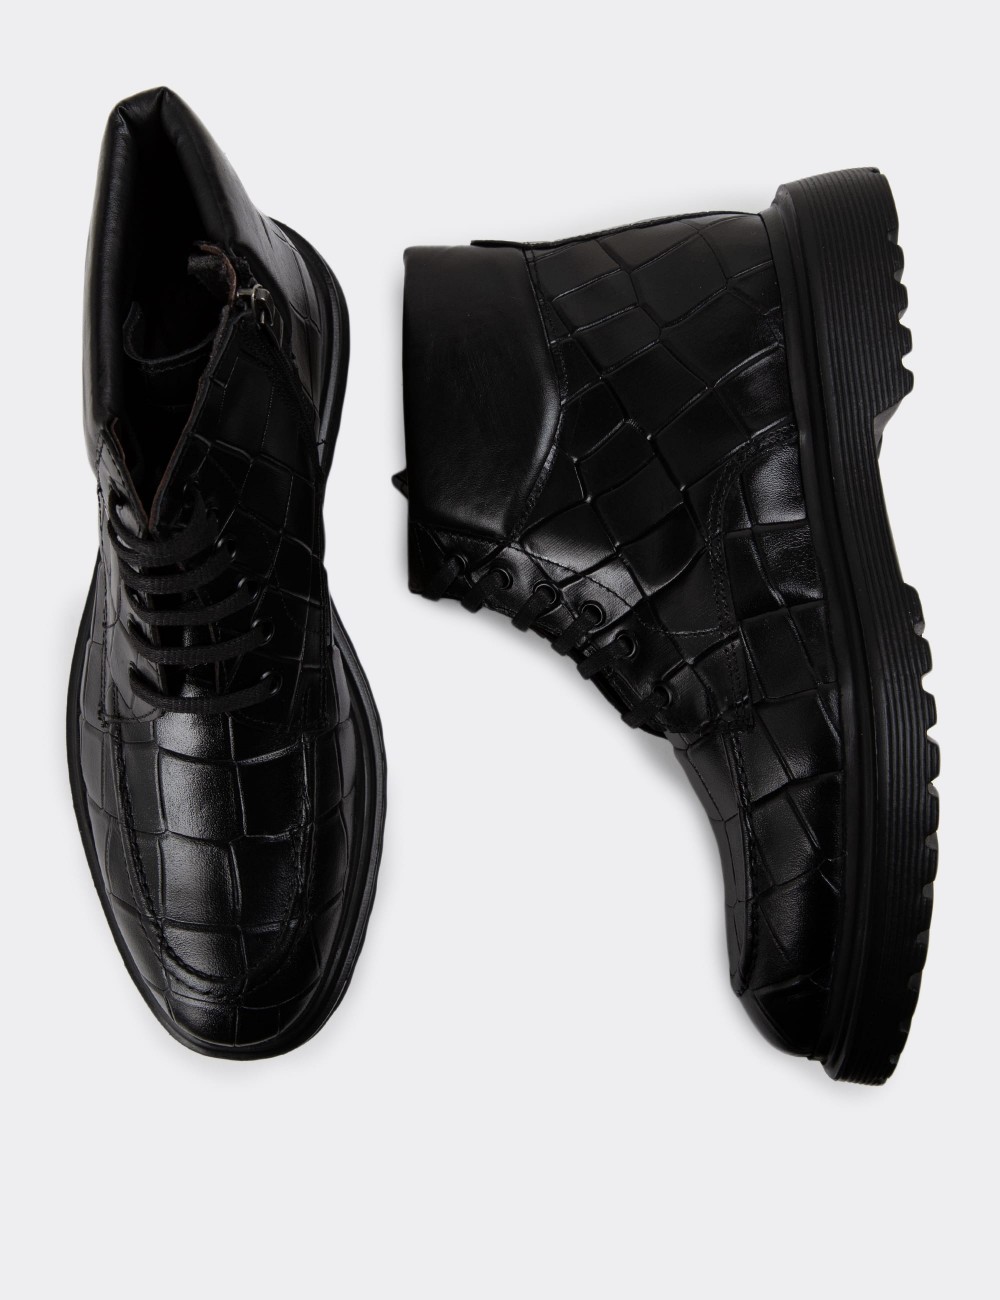 Black Leather Boots - 01929MSYHE03